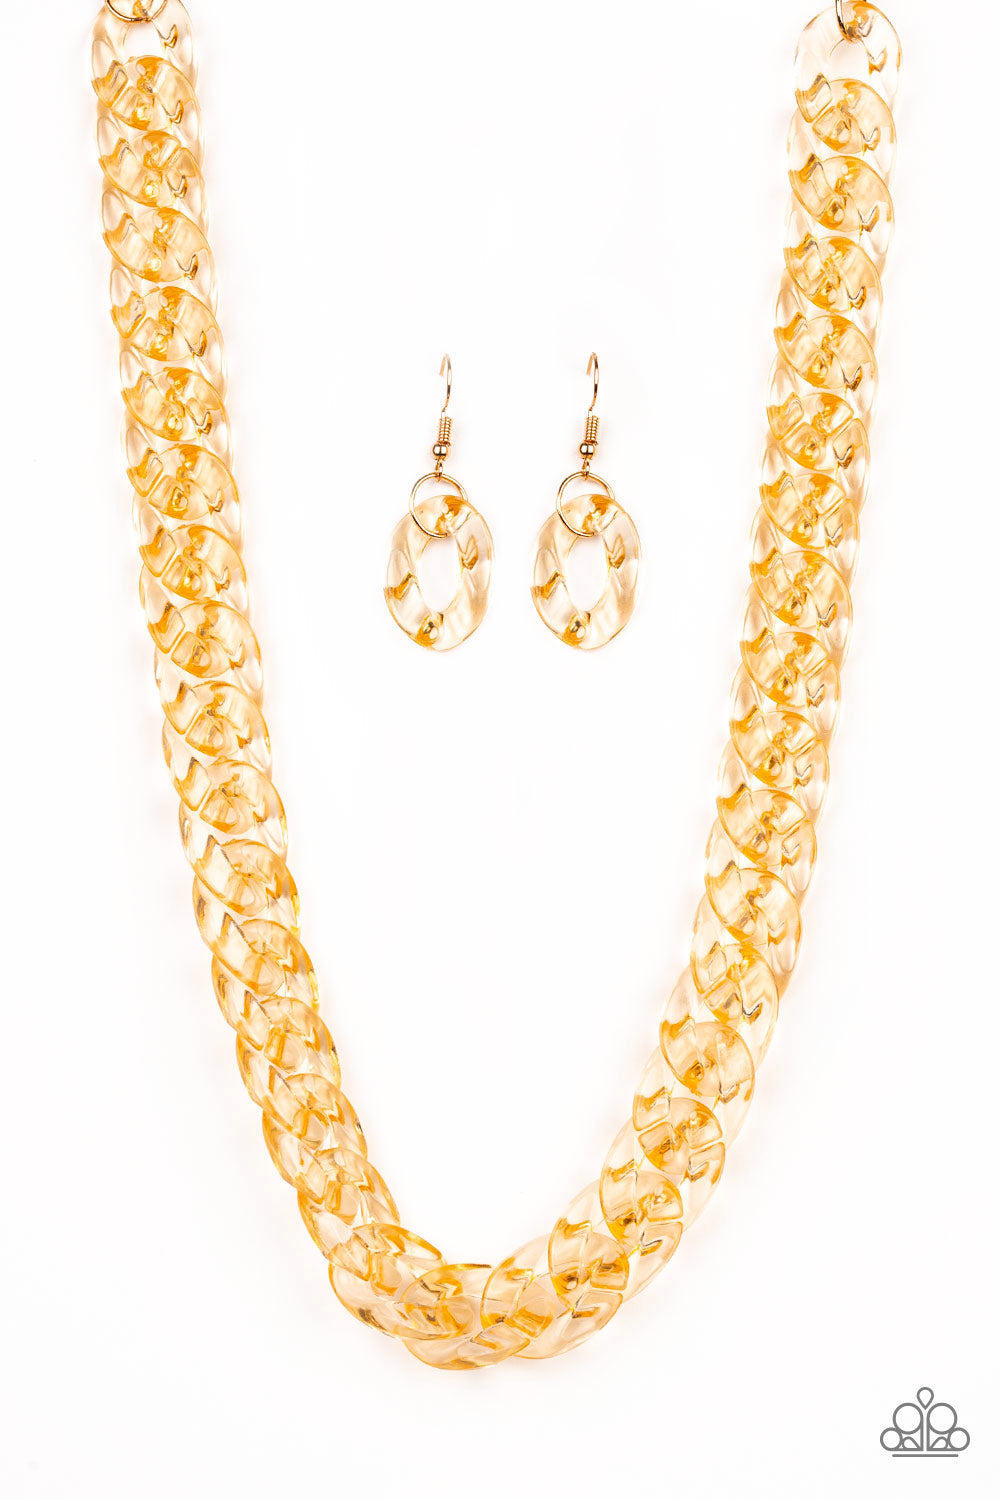 Paparazzi Accessories Put It On Ice - Gold Necklaces - Lady T Accessories